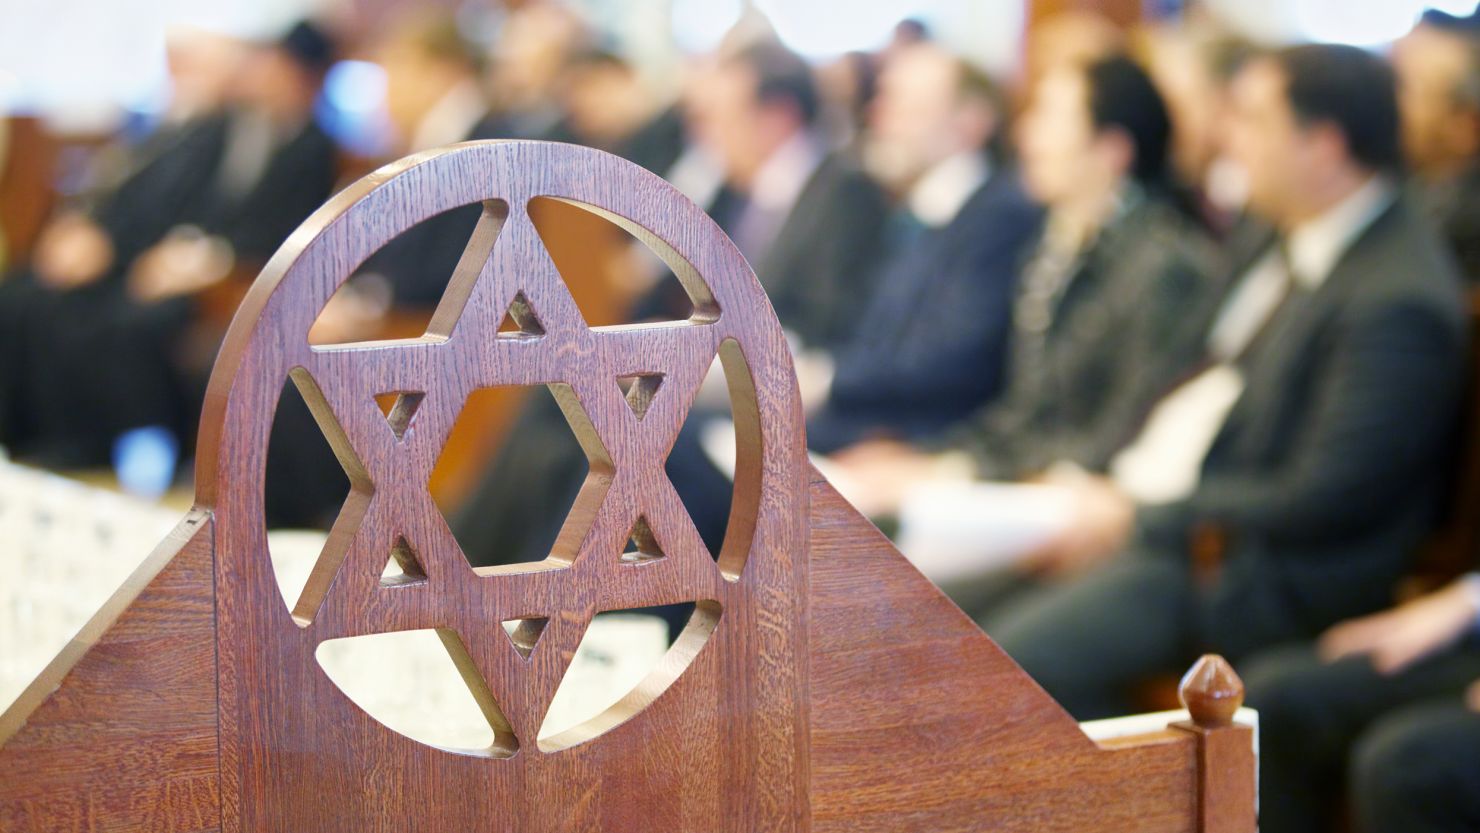 The resurgence of overt antisemitism has once again surfaced questions about American Jewish identity.